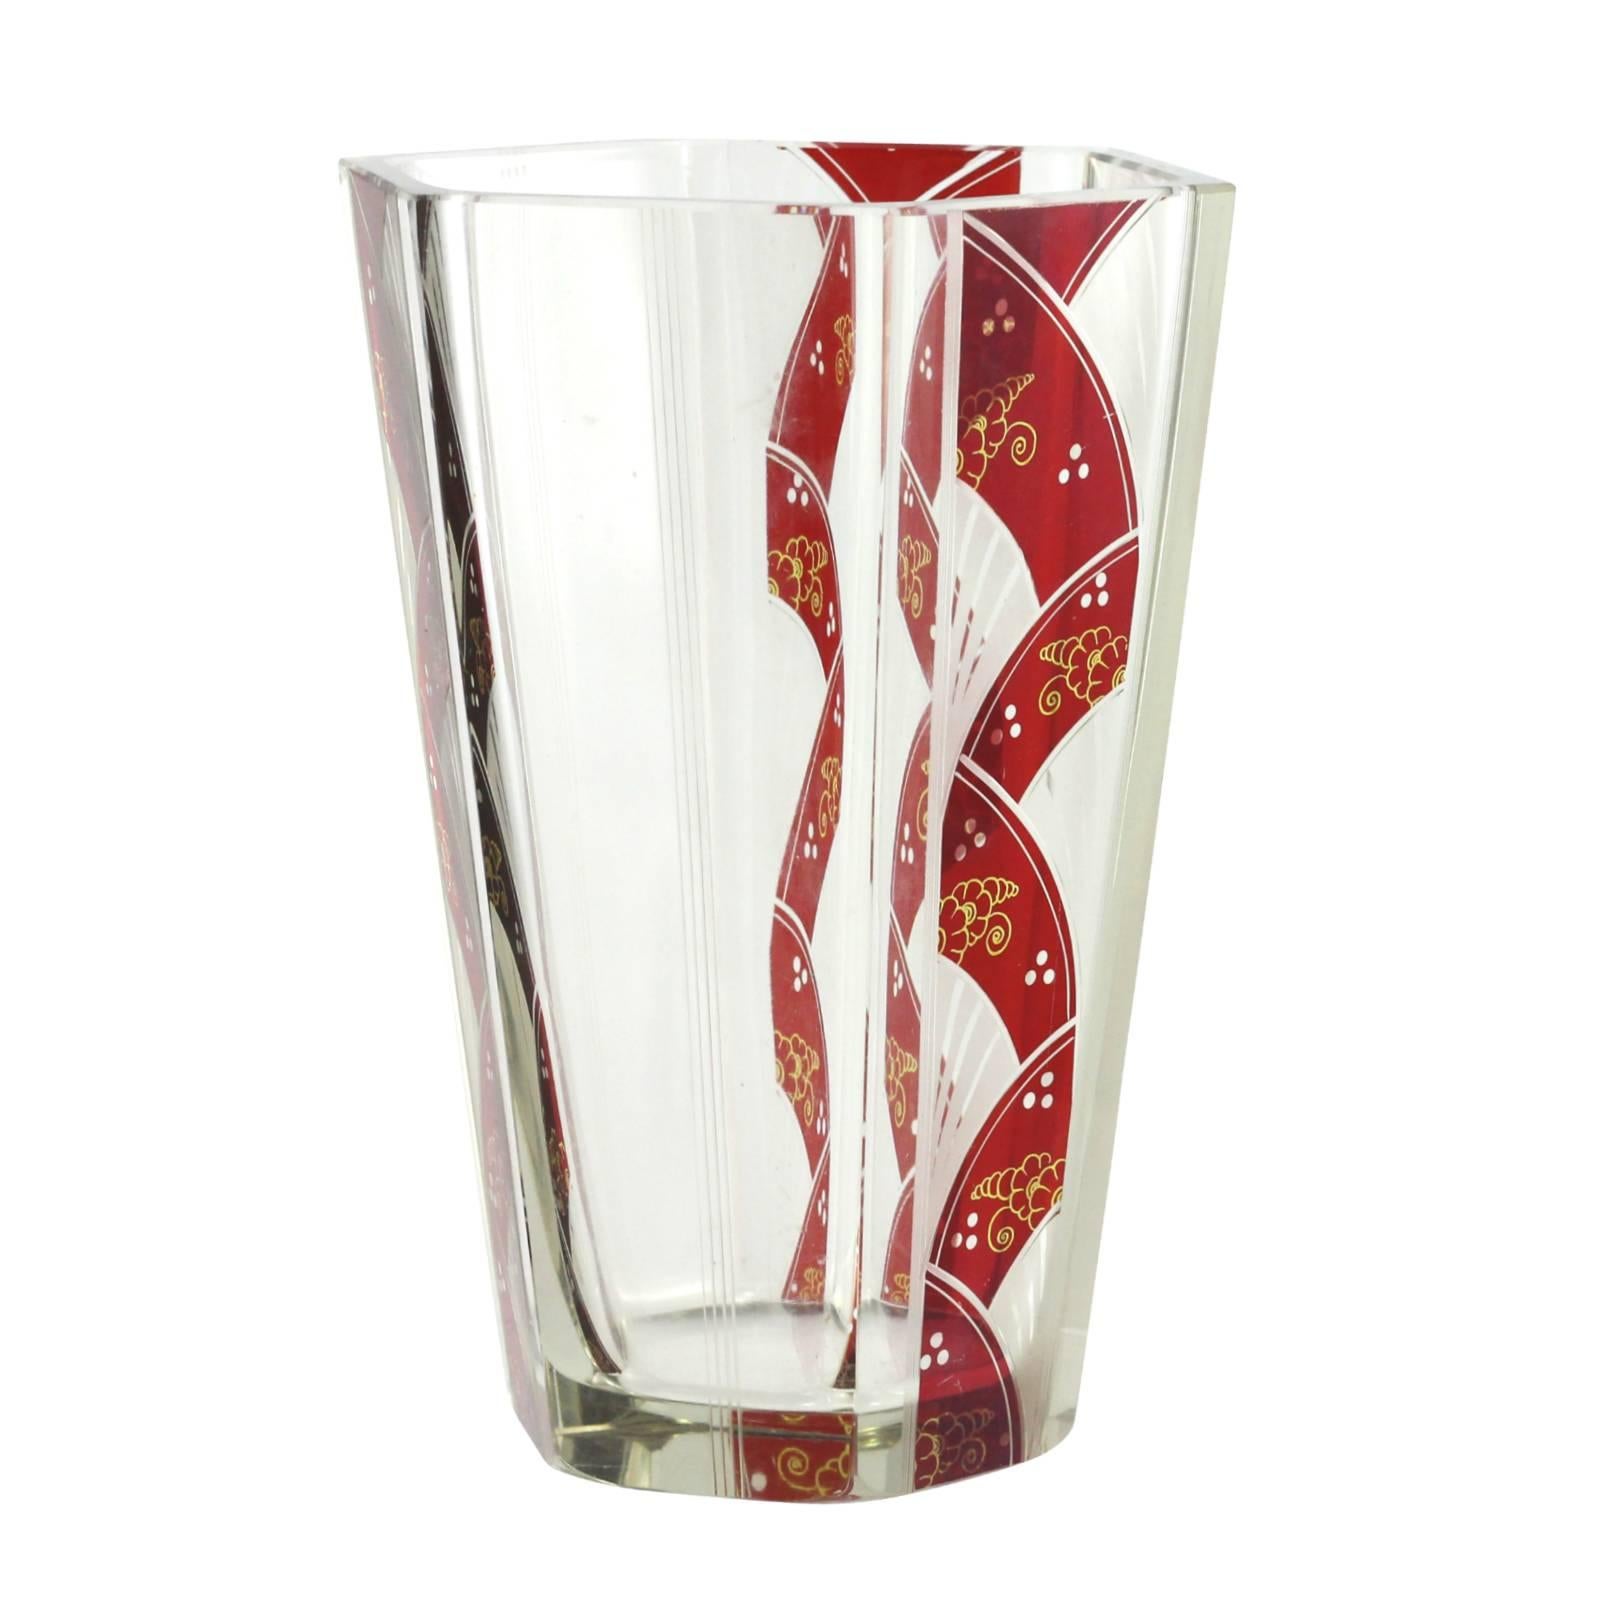 Art Deco Etched Hexagonal Vase with Ruby Flashing by Karl Palda  In Excellent Condition For Sale In Brisbane, Queensland